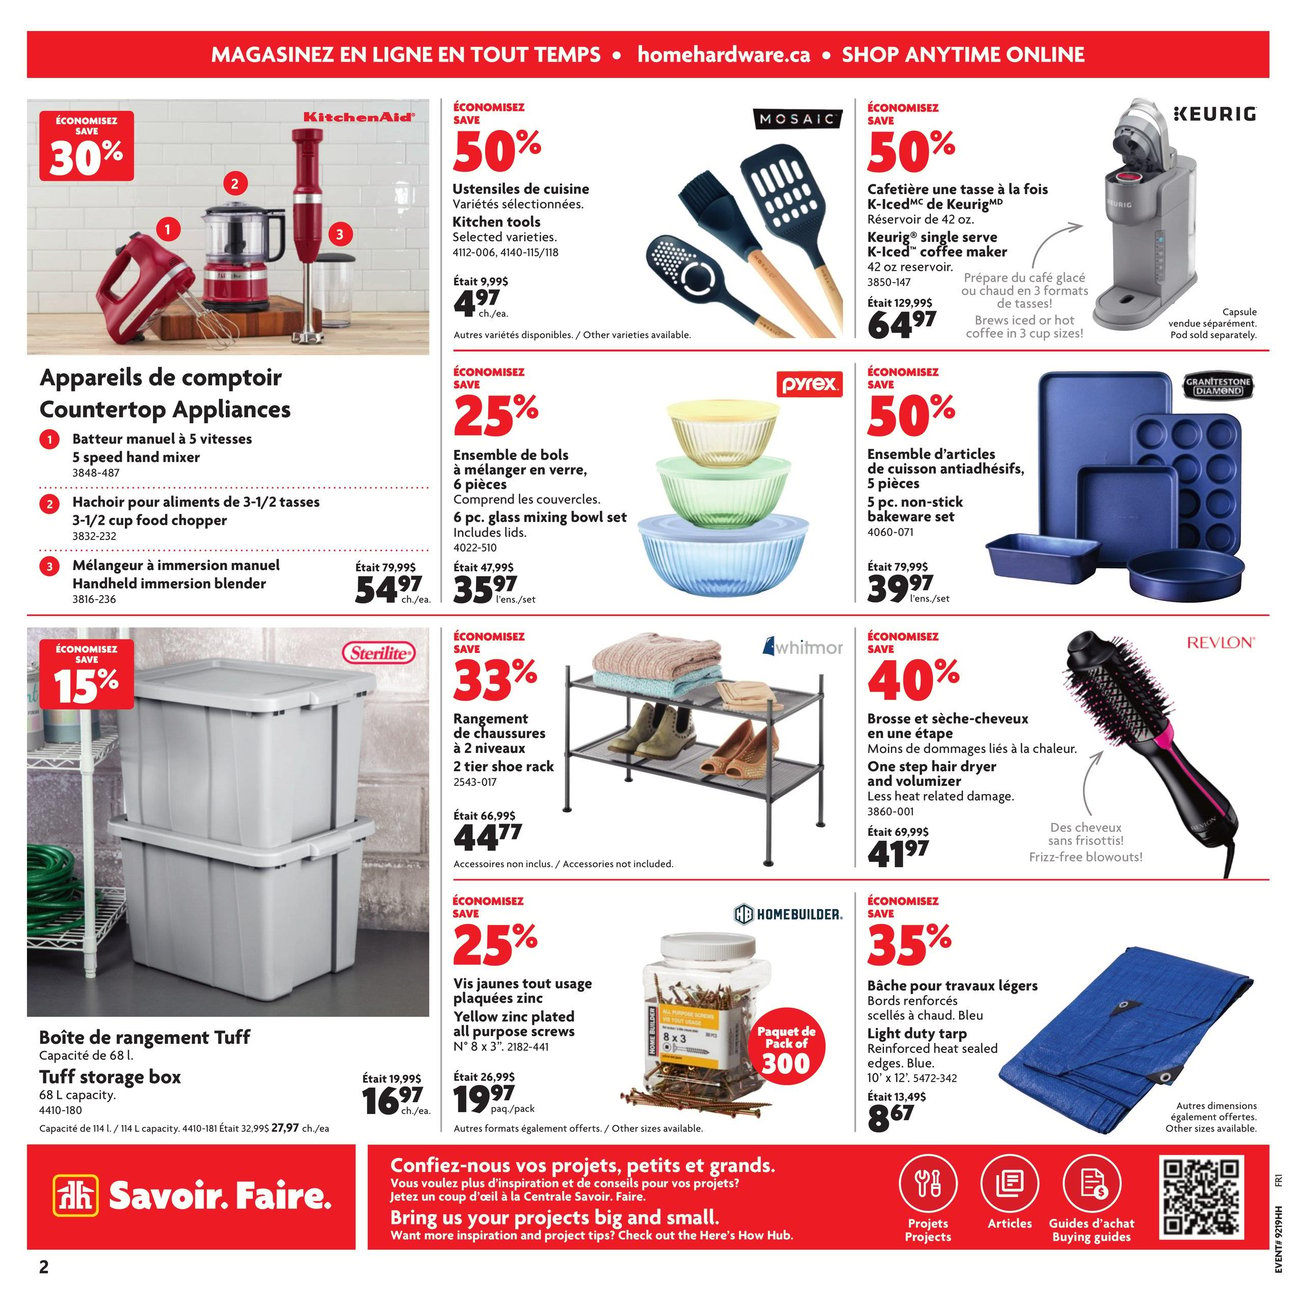 Home Hardware - Quebec - 2 Weeks of Savings - Page 3